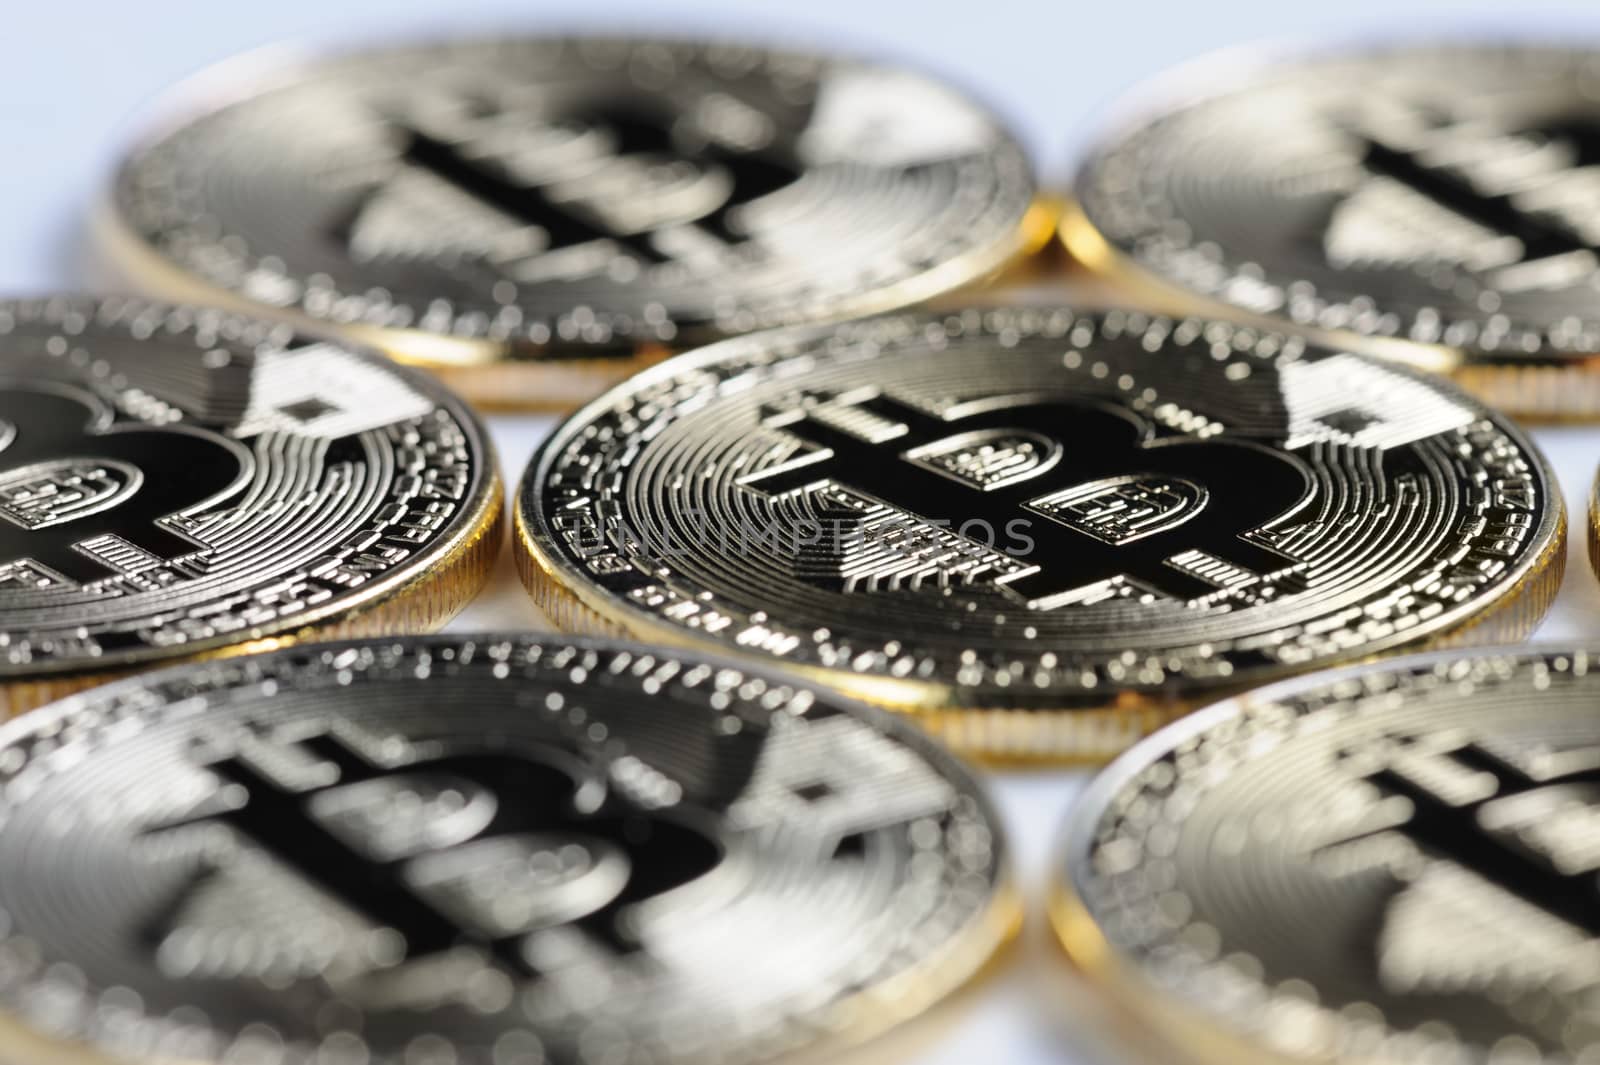 Macro view of shiny Bitcoin souvenire coins on light background, selective focus